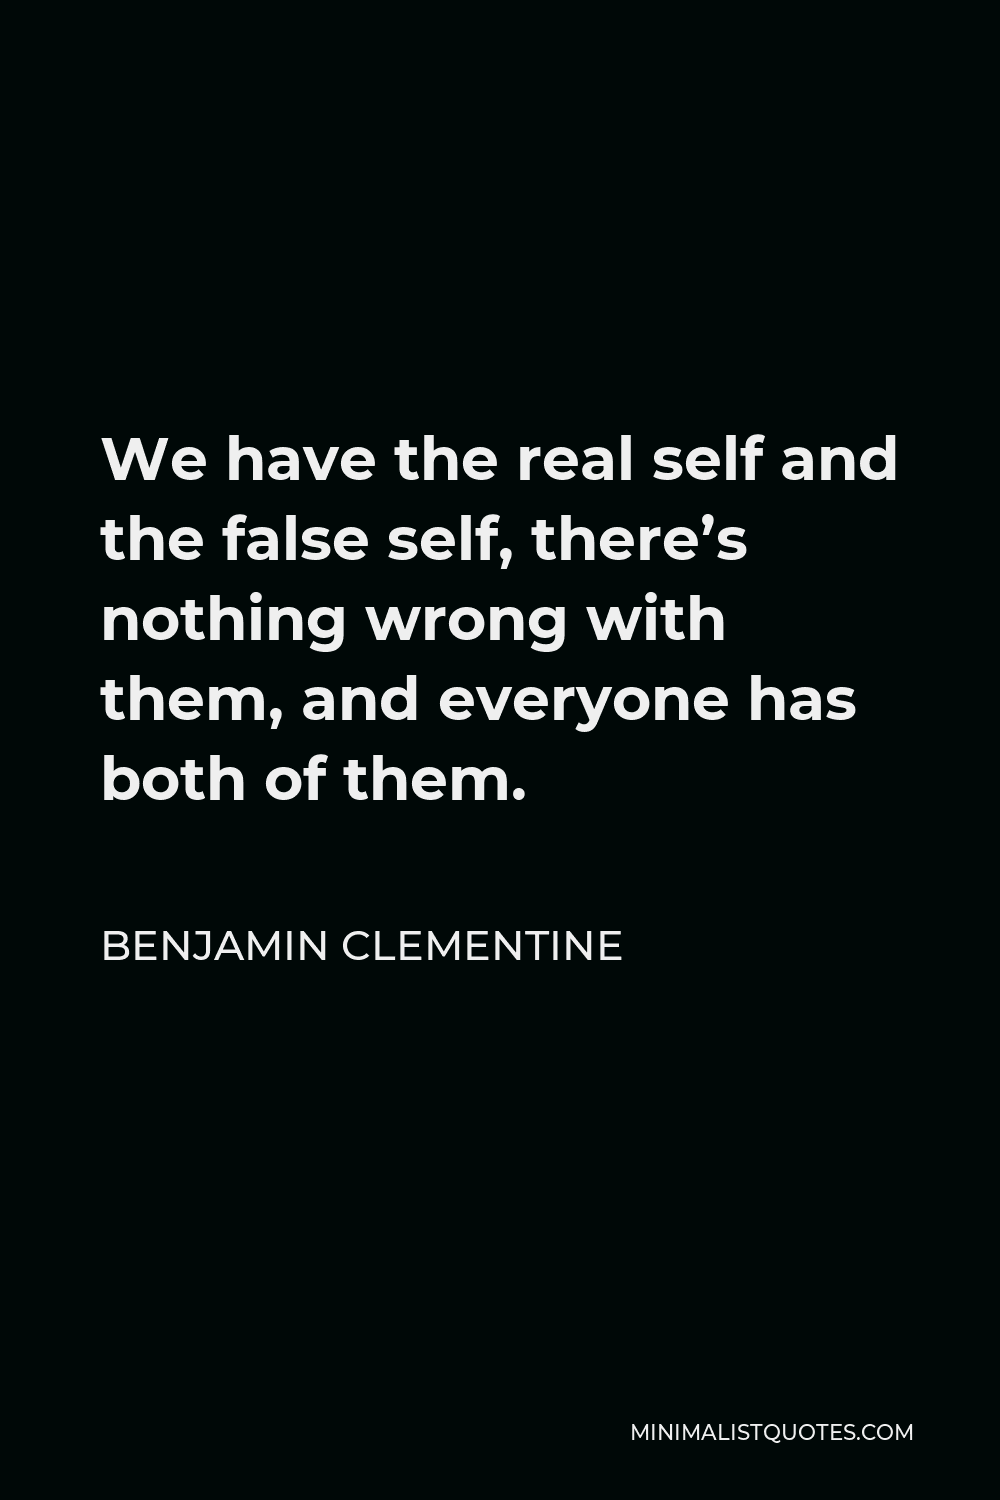 Benjamin Clementine Quote - We have the real self and the false self, there’s nothing wrong with them, and everyone has both of them.